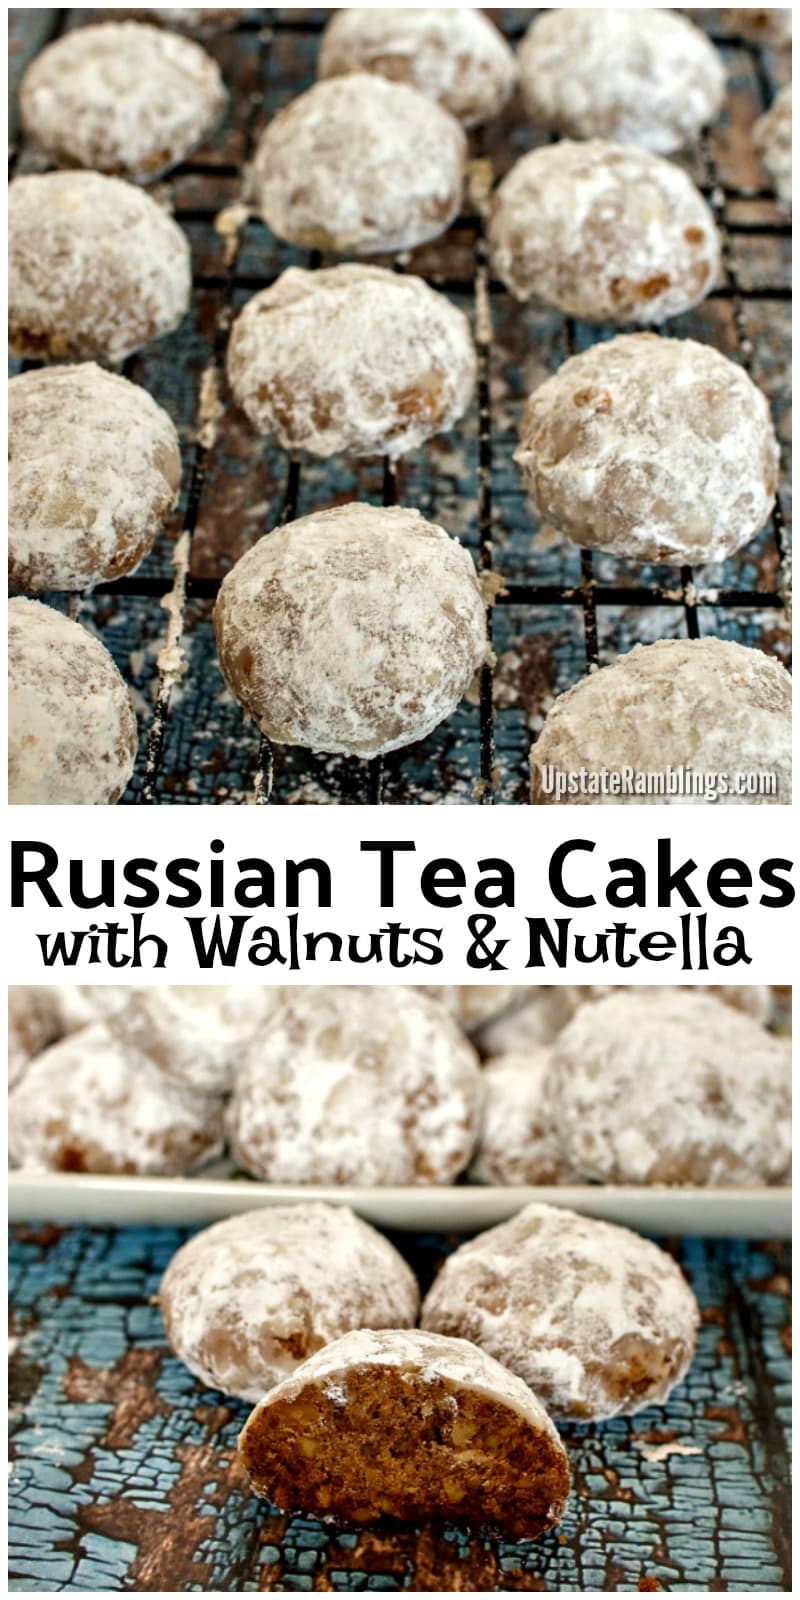 Russian tea cakes with nutella.